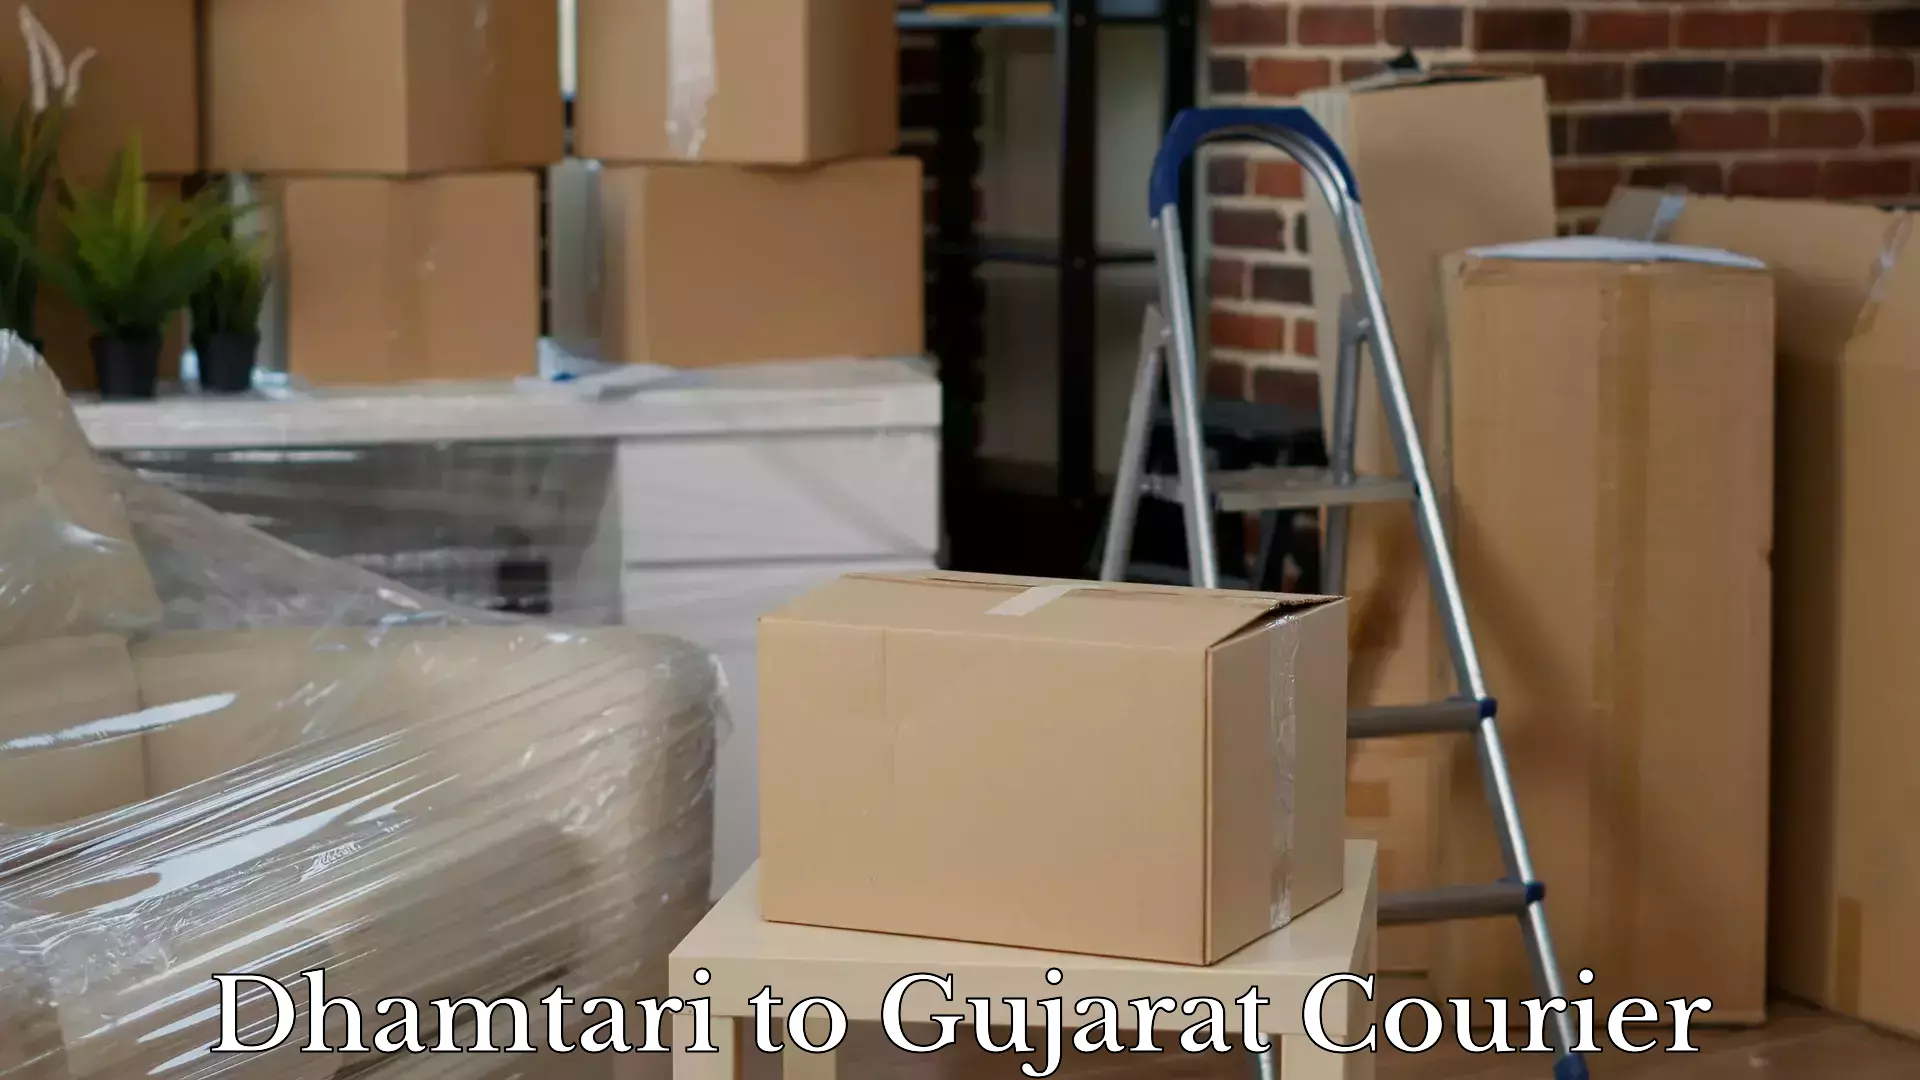 Instant baggage transport quote Dhamtari to Dahod